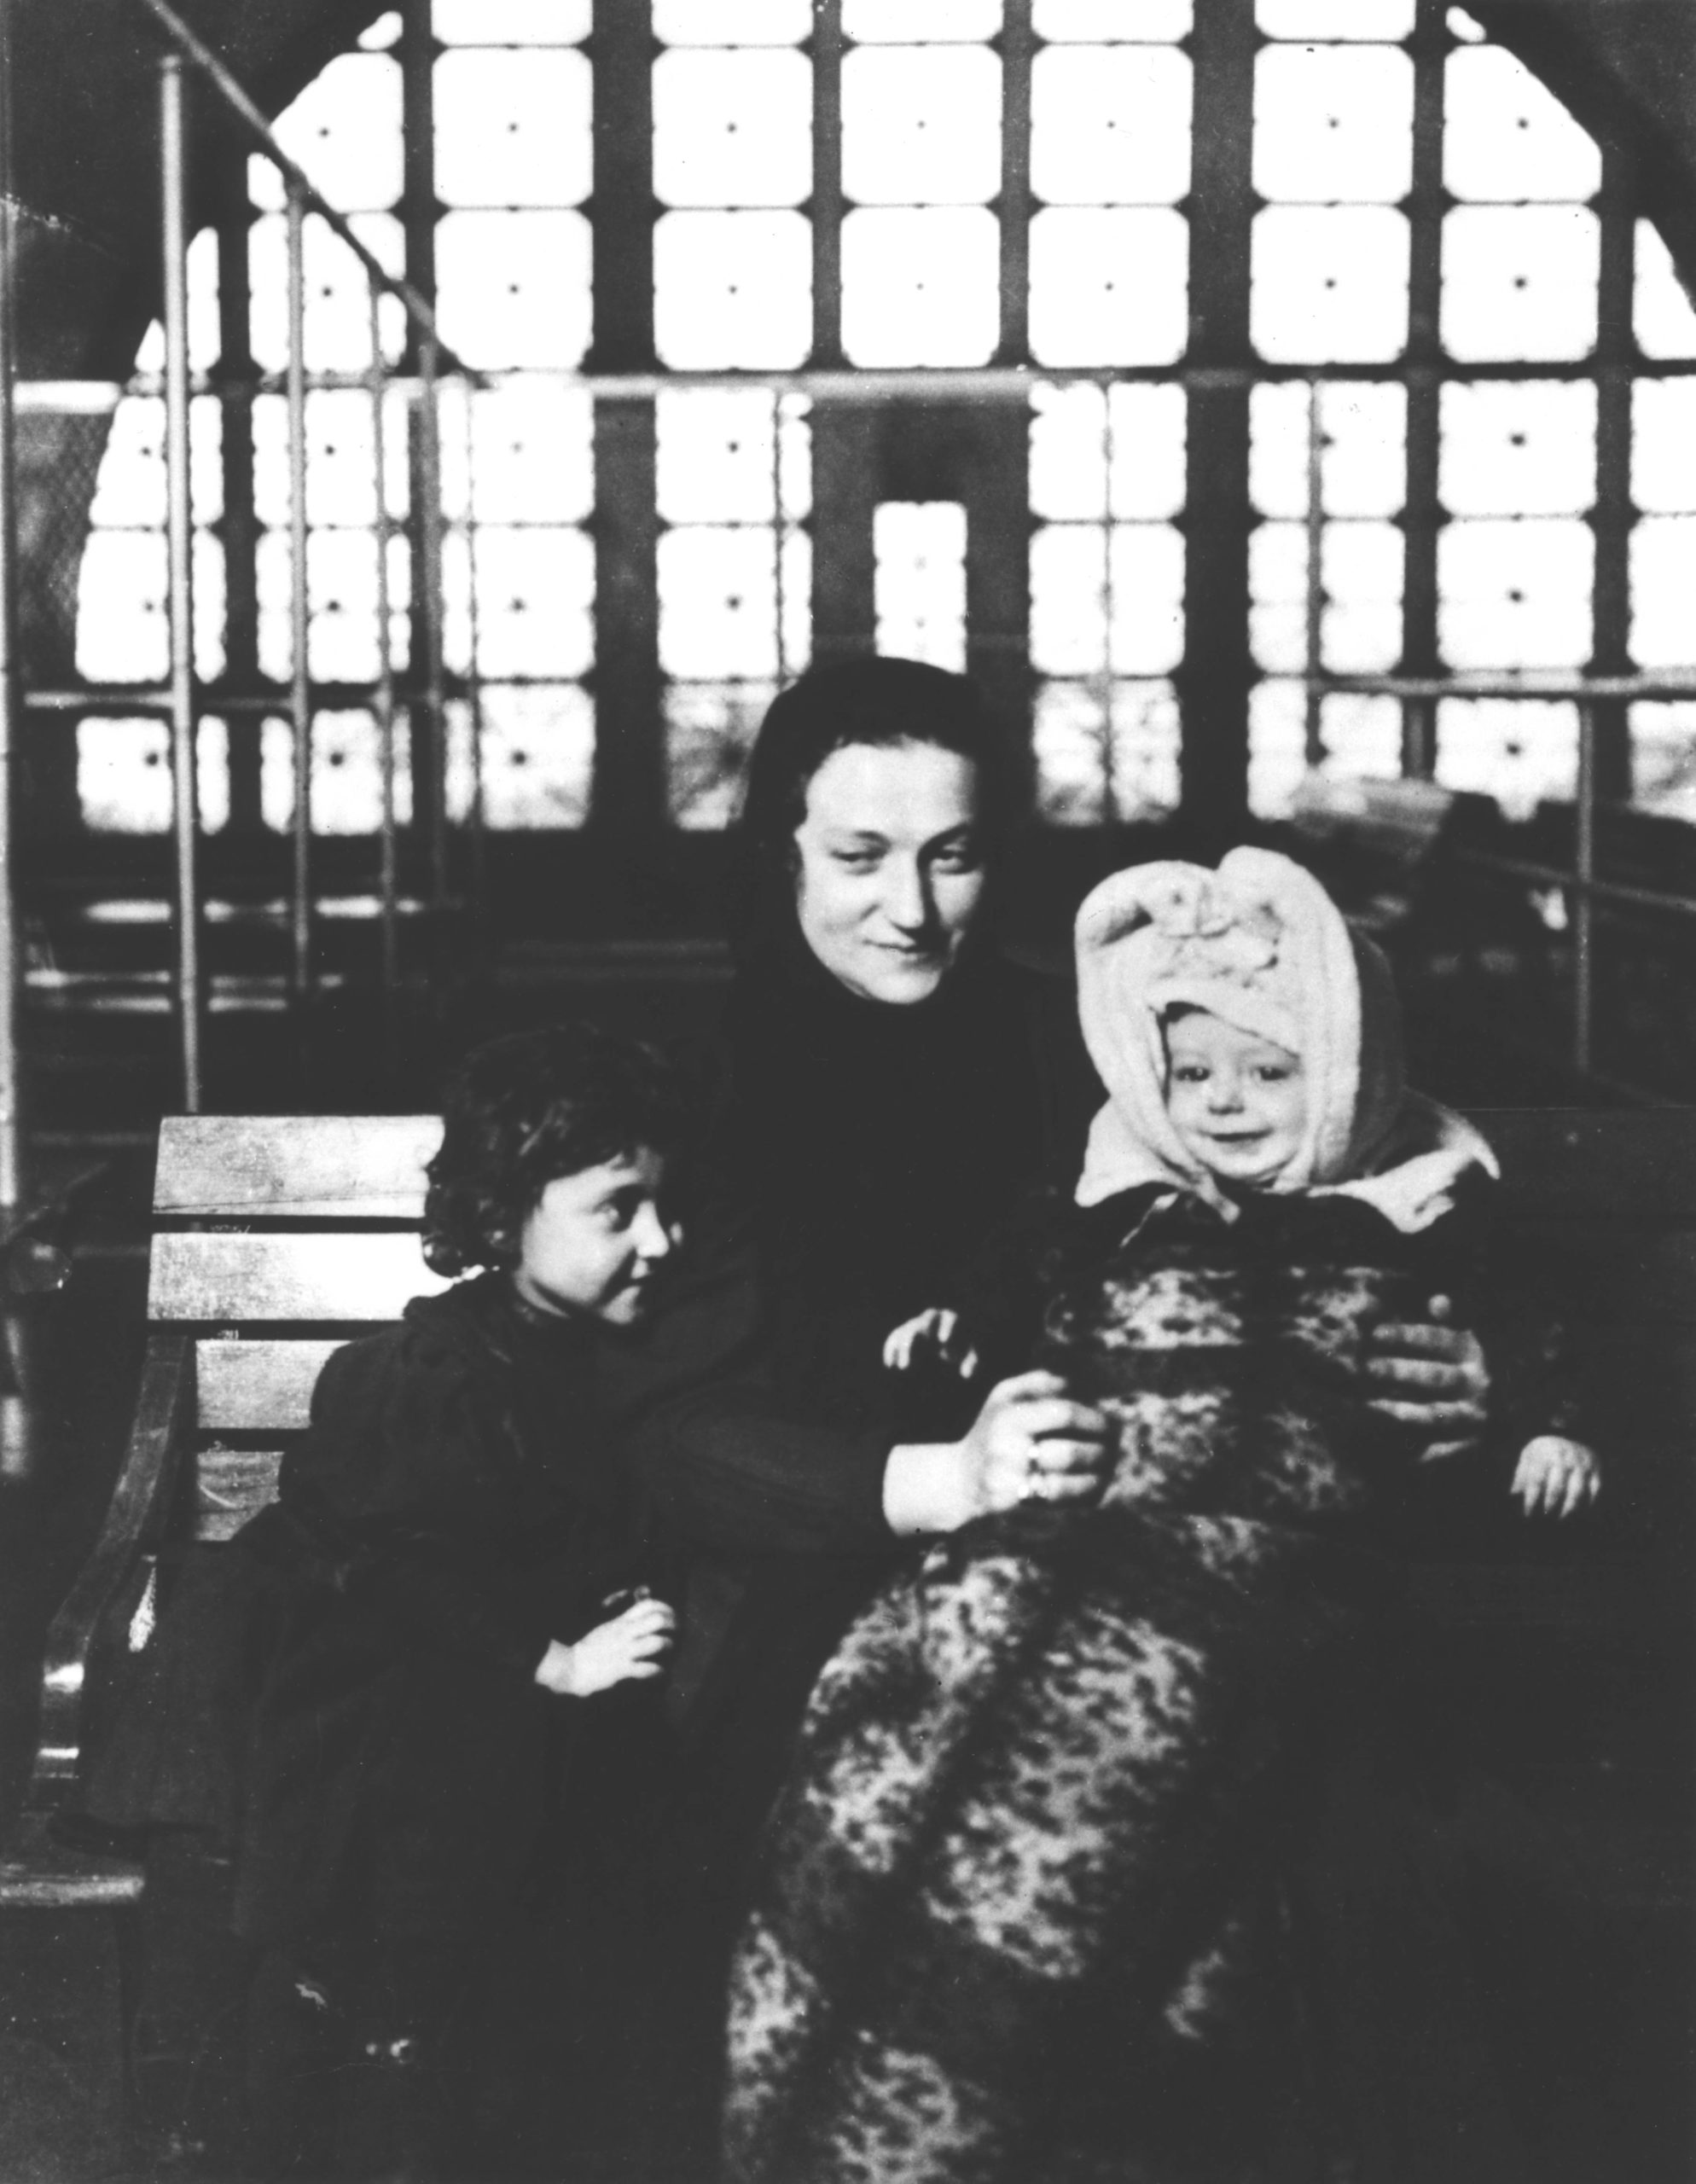 Black and white photo of immigrants at Ellis Island